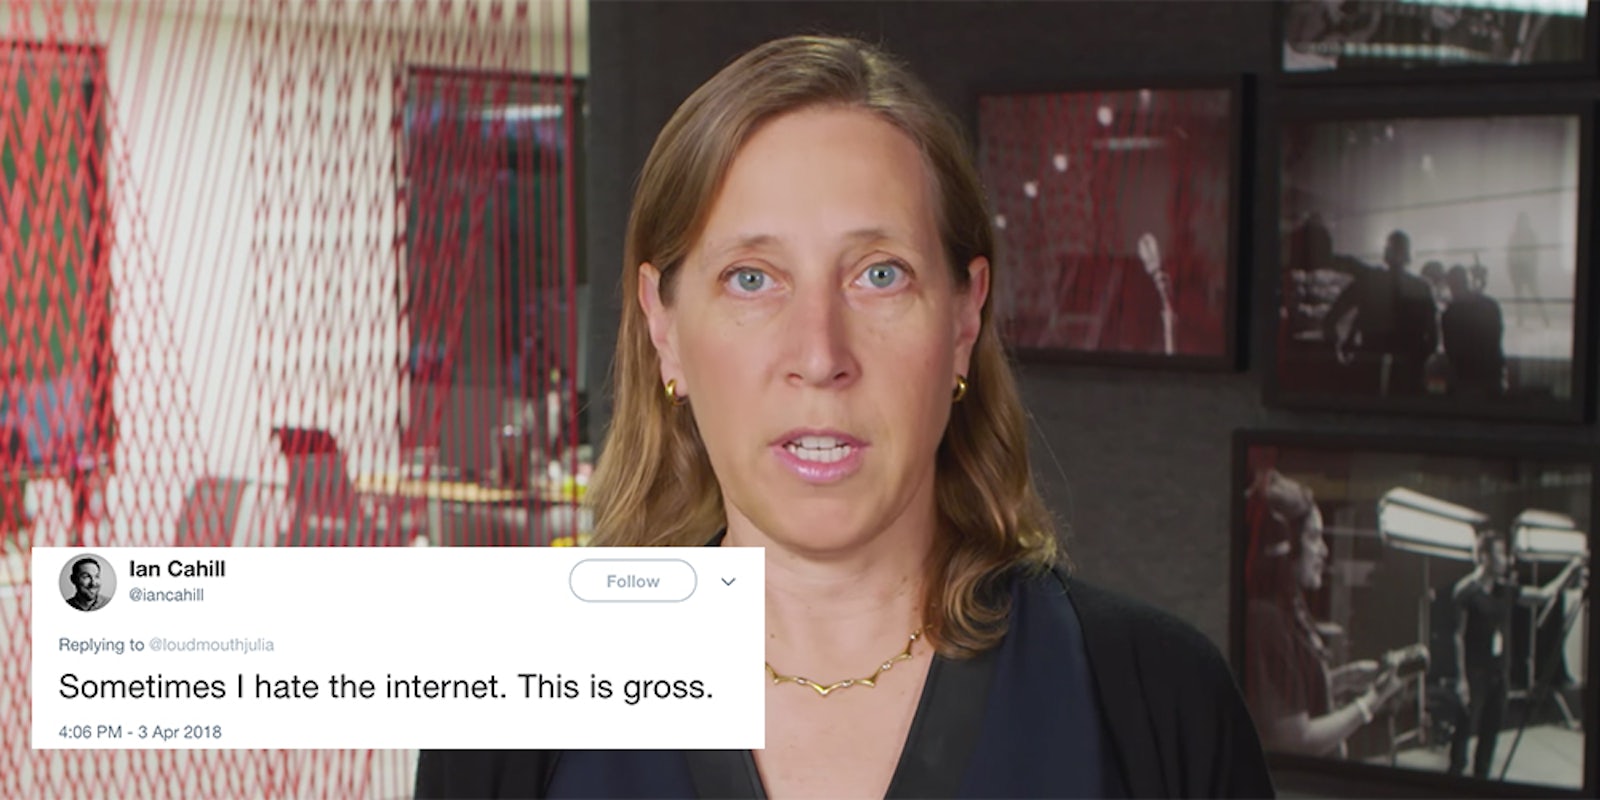 People 'joked' about killing YouTube CEO Susan Wojcicki amid news of an active shooter at the YouTube headquarters.